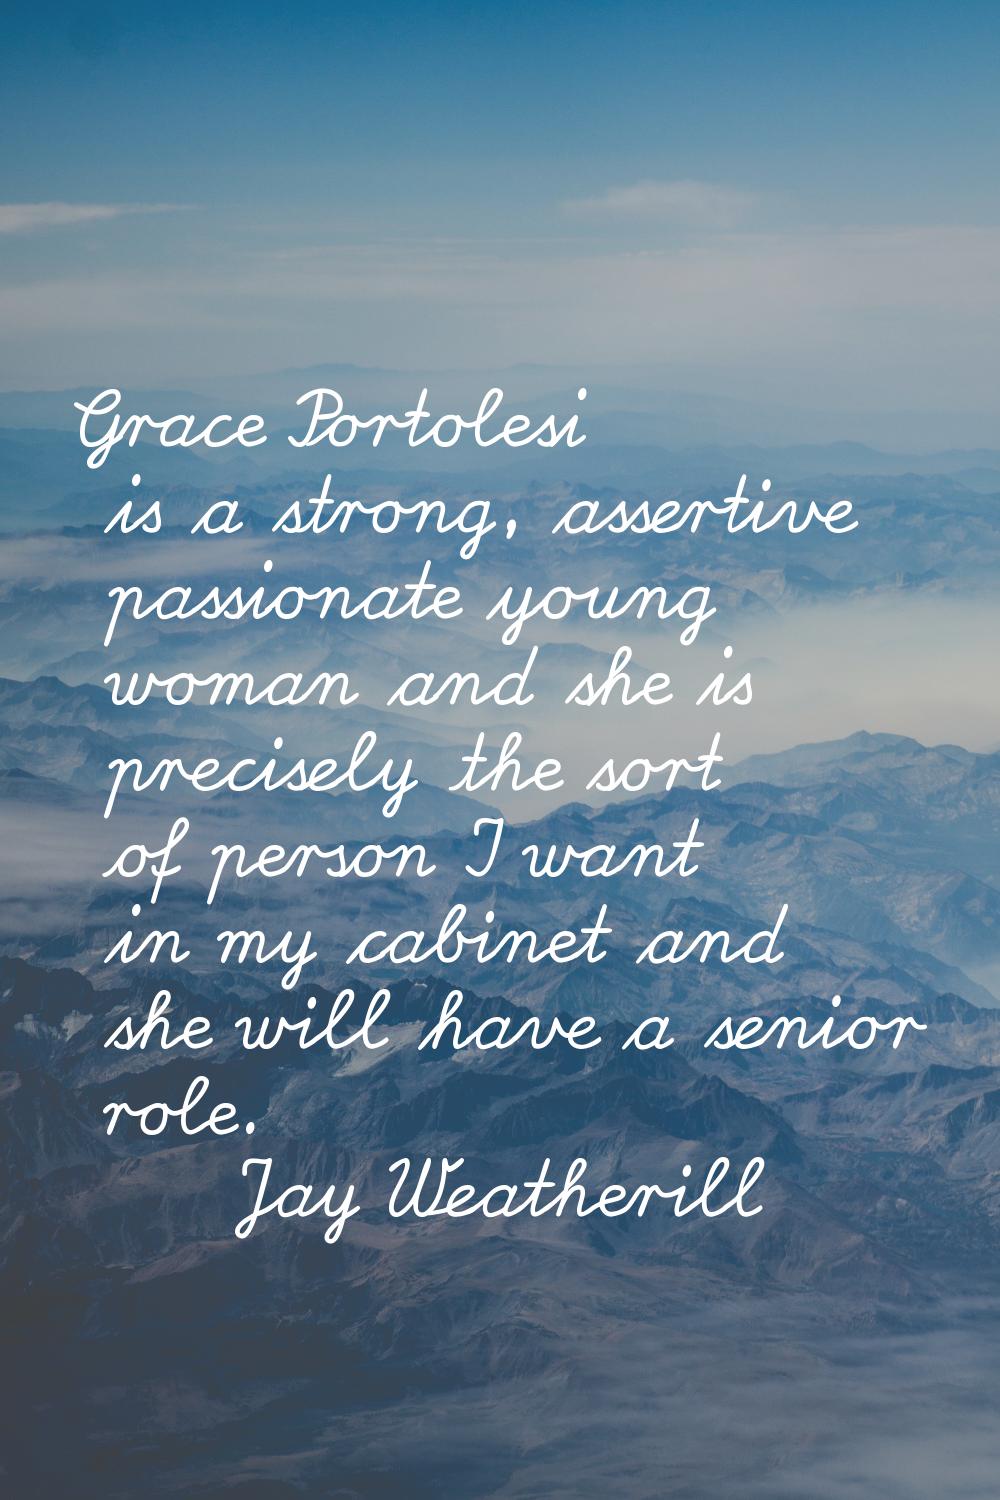 Grace Portolesi is a strong, assertive passionate young woman and she is precisely the sort of pers